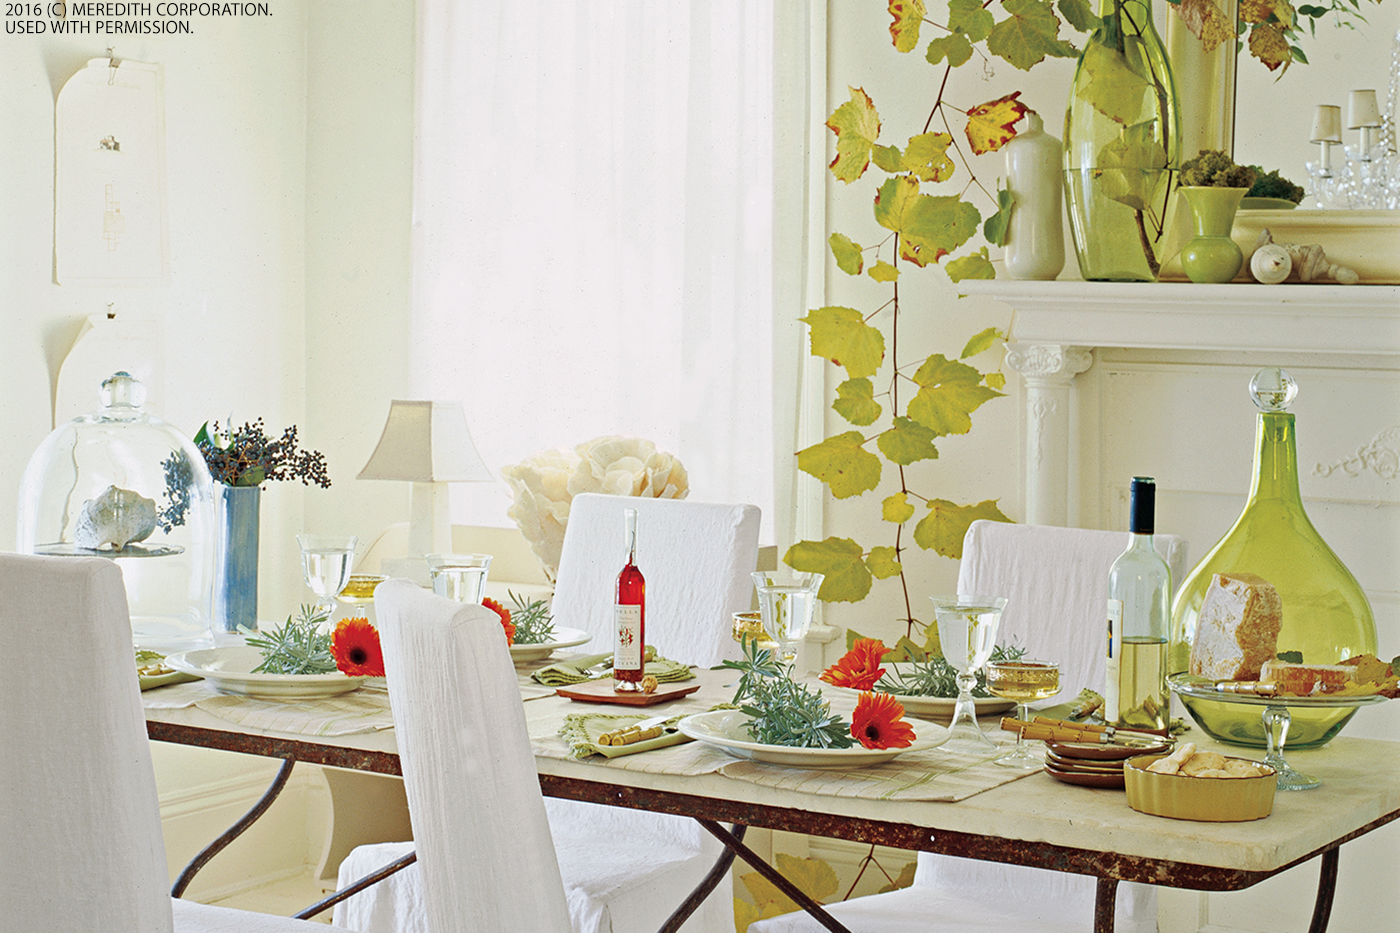 bhgrelife.com - Thanksgiving Decorating That’s Inspired by Nature